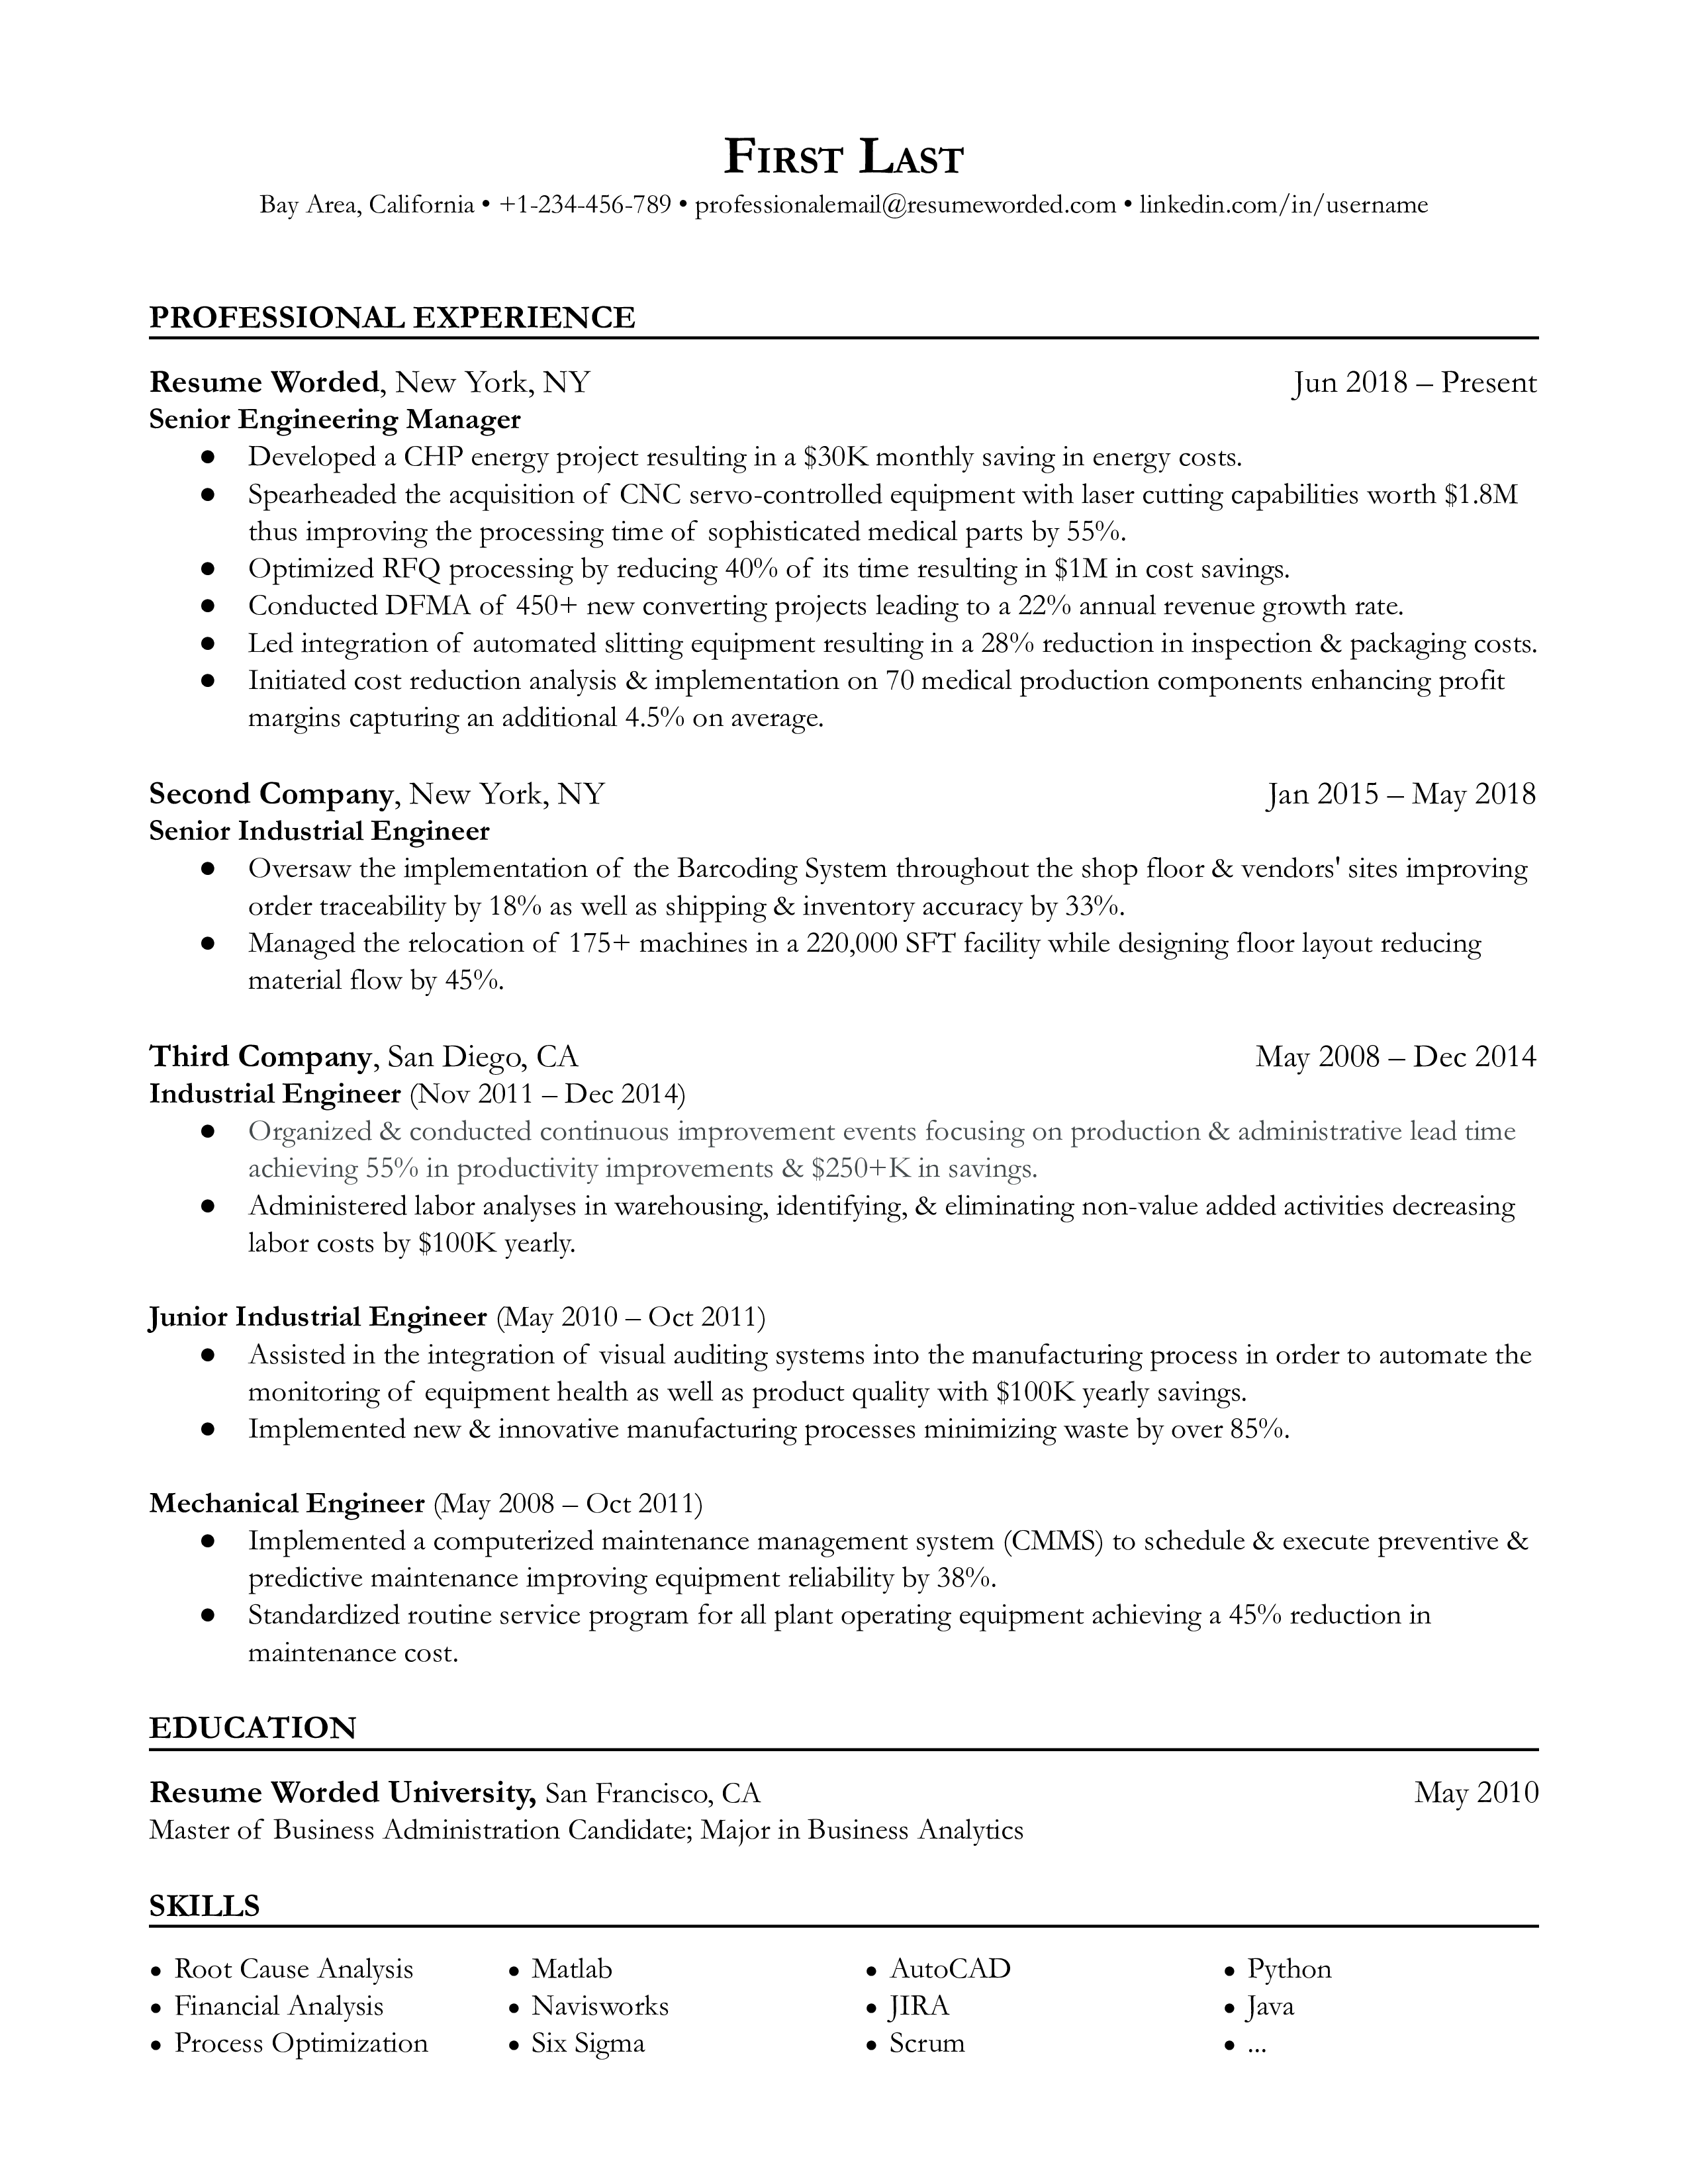 Senior Engineering Manager  Resume Template + Example